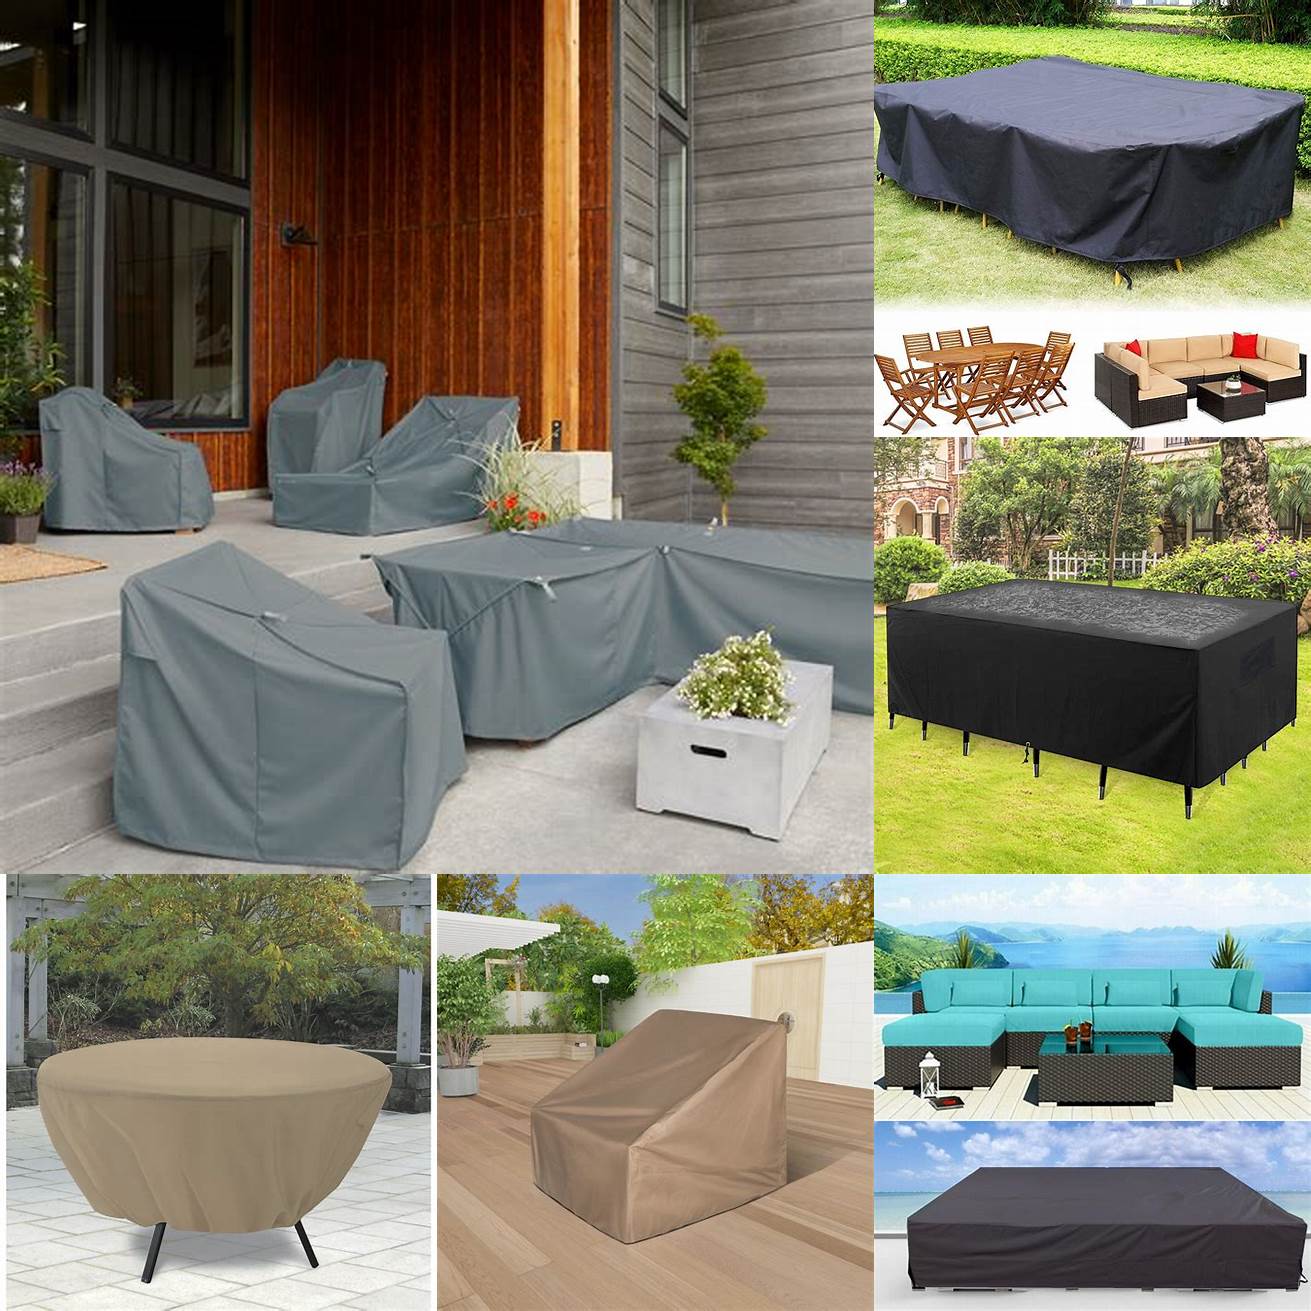 Covering outdoor furniture